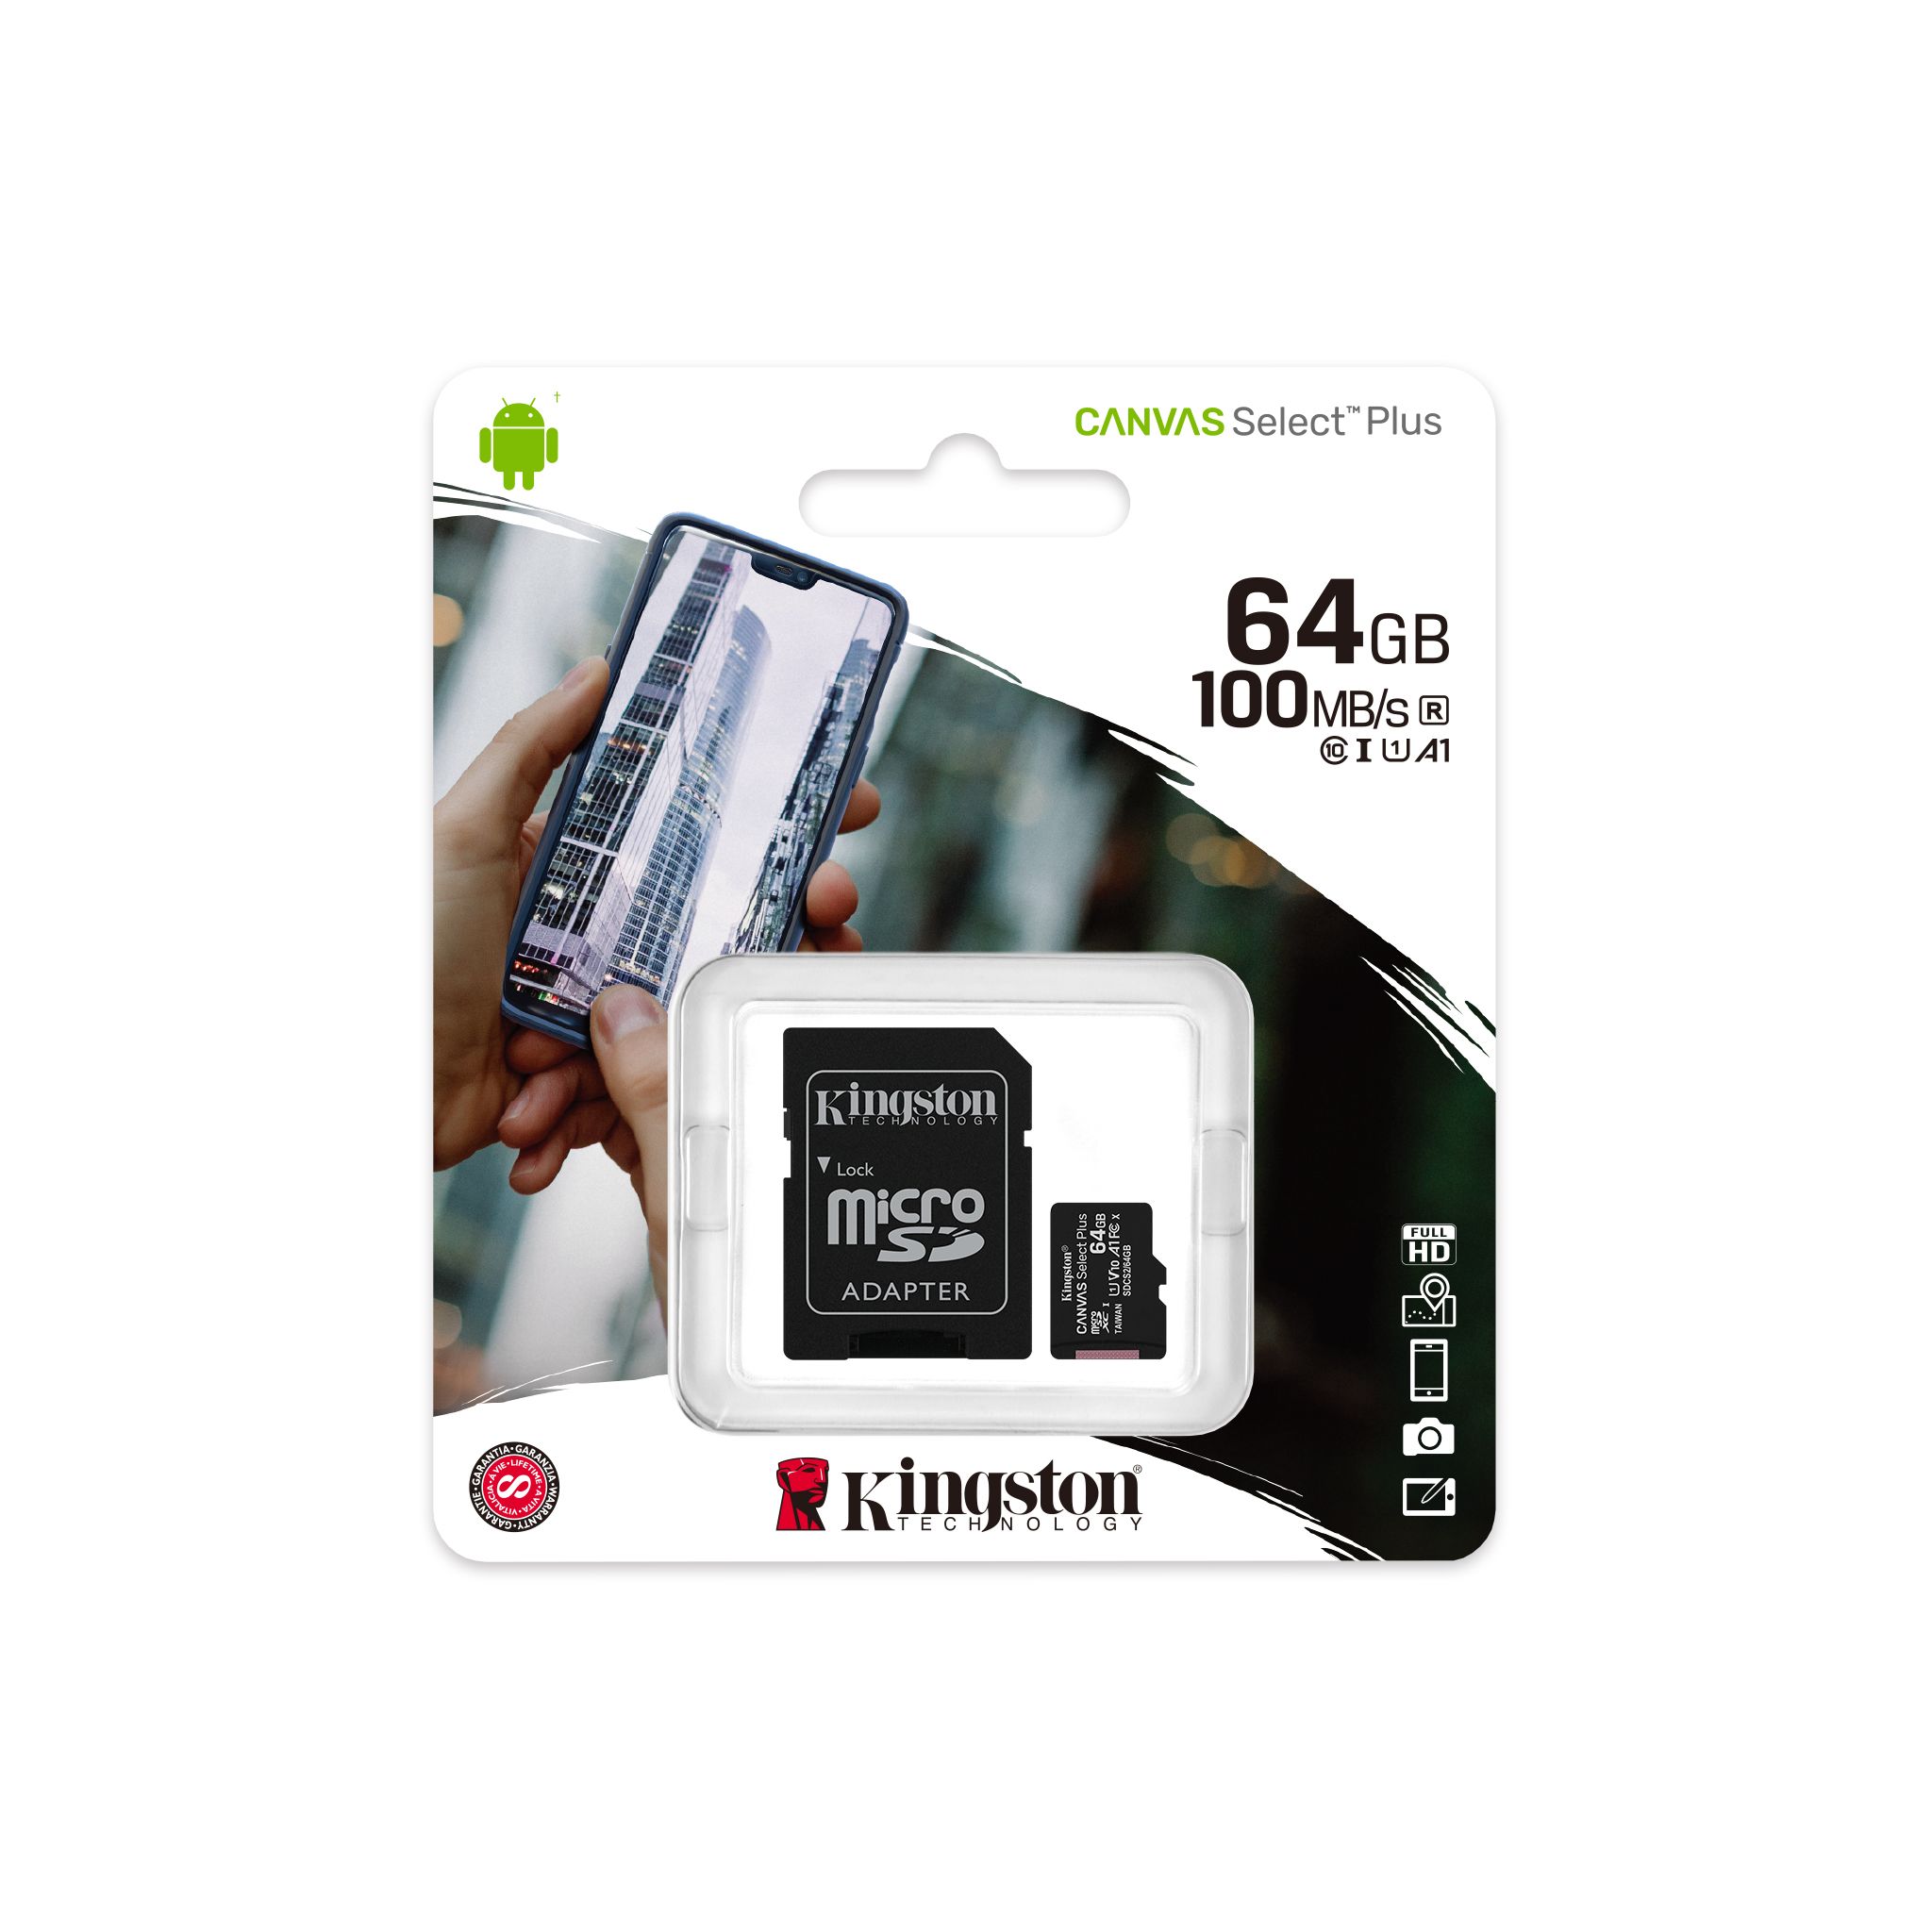 Kingston 64GB Samsung SM-N915T MicroSDXC Canvas Select Plus Card Verified by SanFlash. 100MBs Works with Kingston 